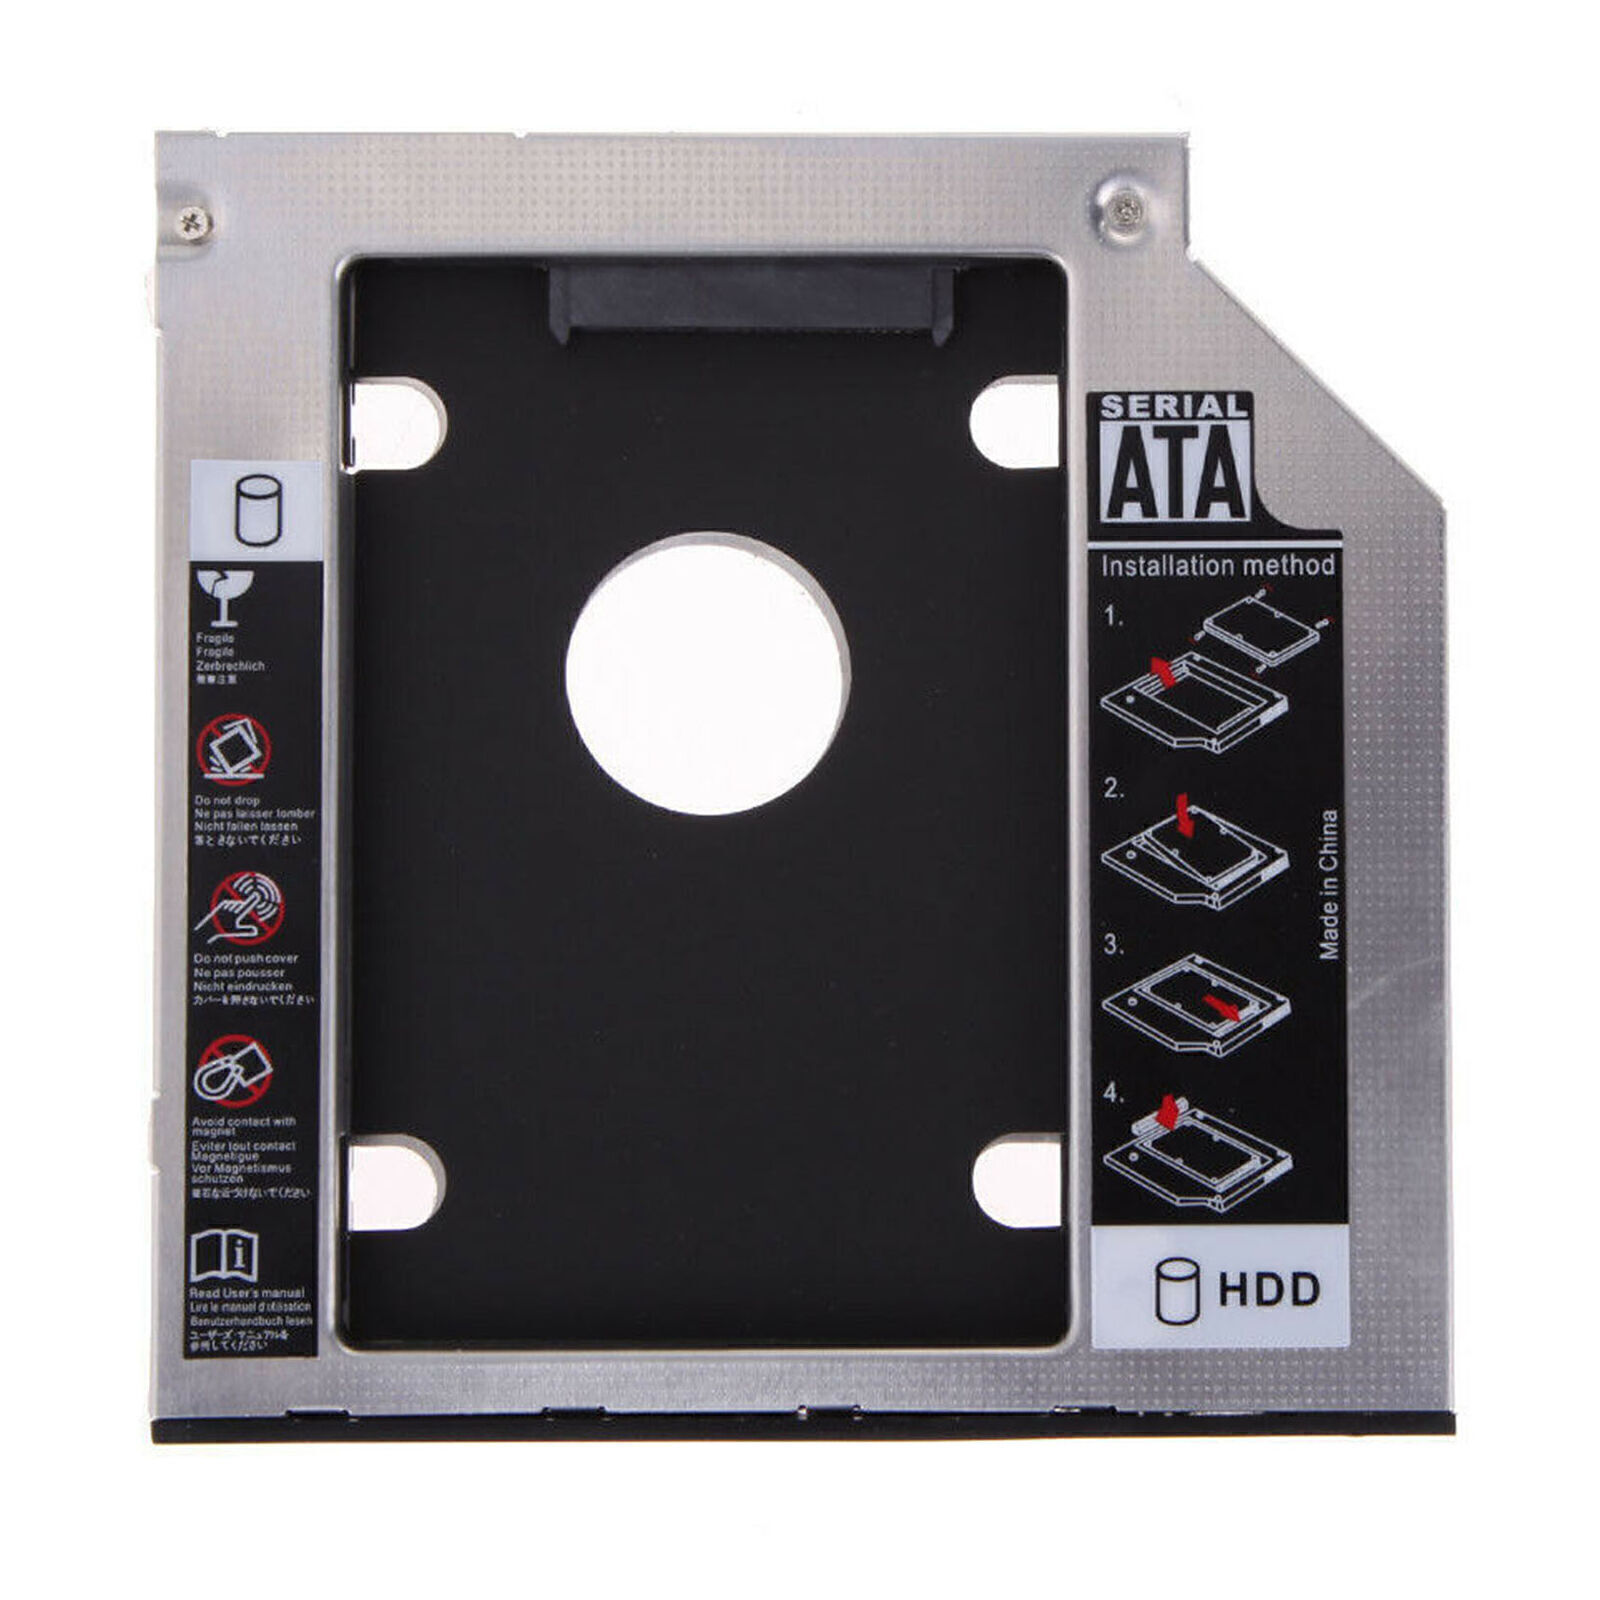 SATA 2nd HDD SSD Hard Drive Caddy for 12.7mm Universal CD / DVD-ROM Optical US